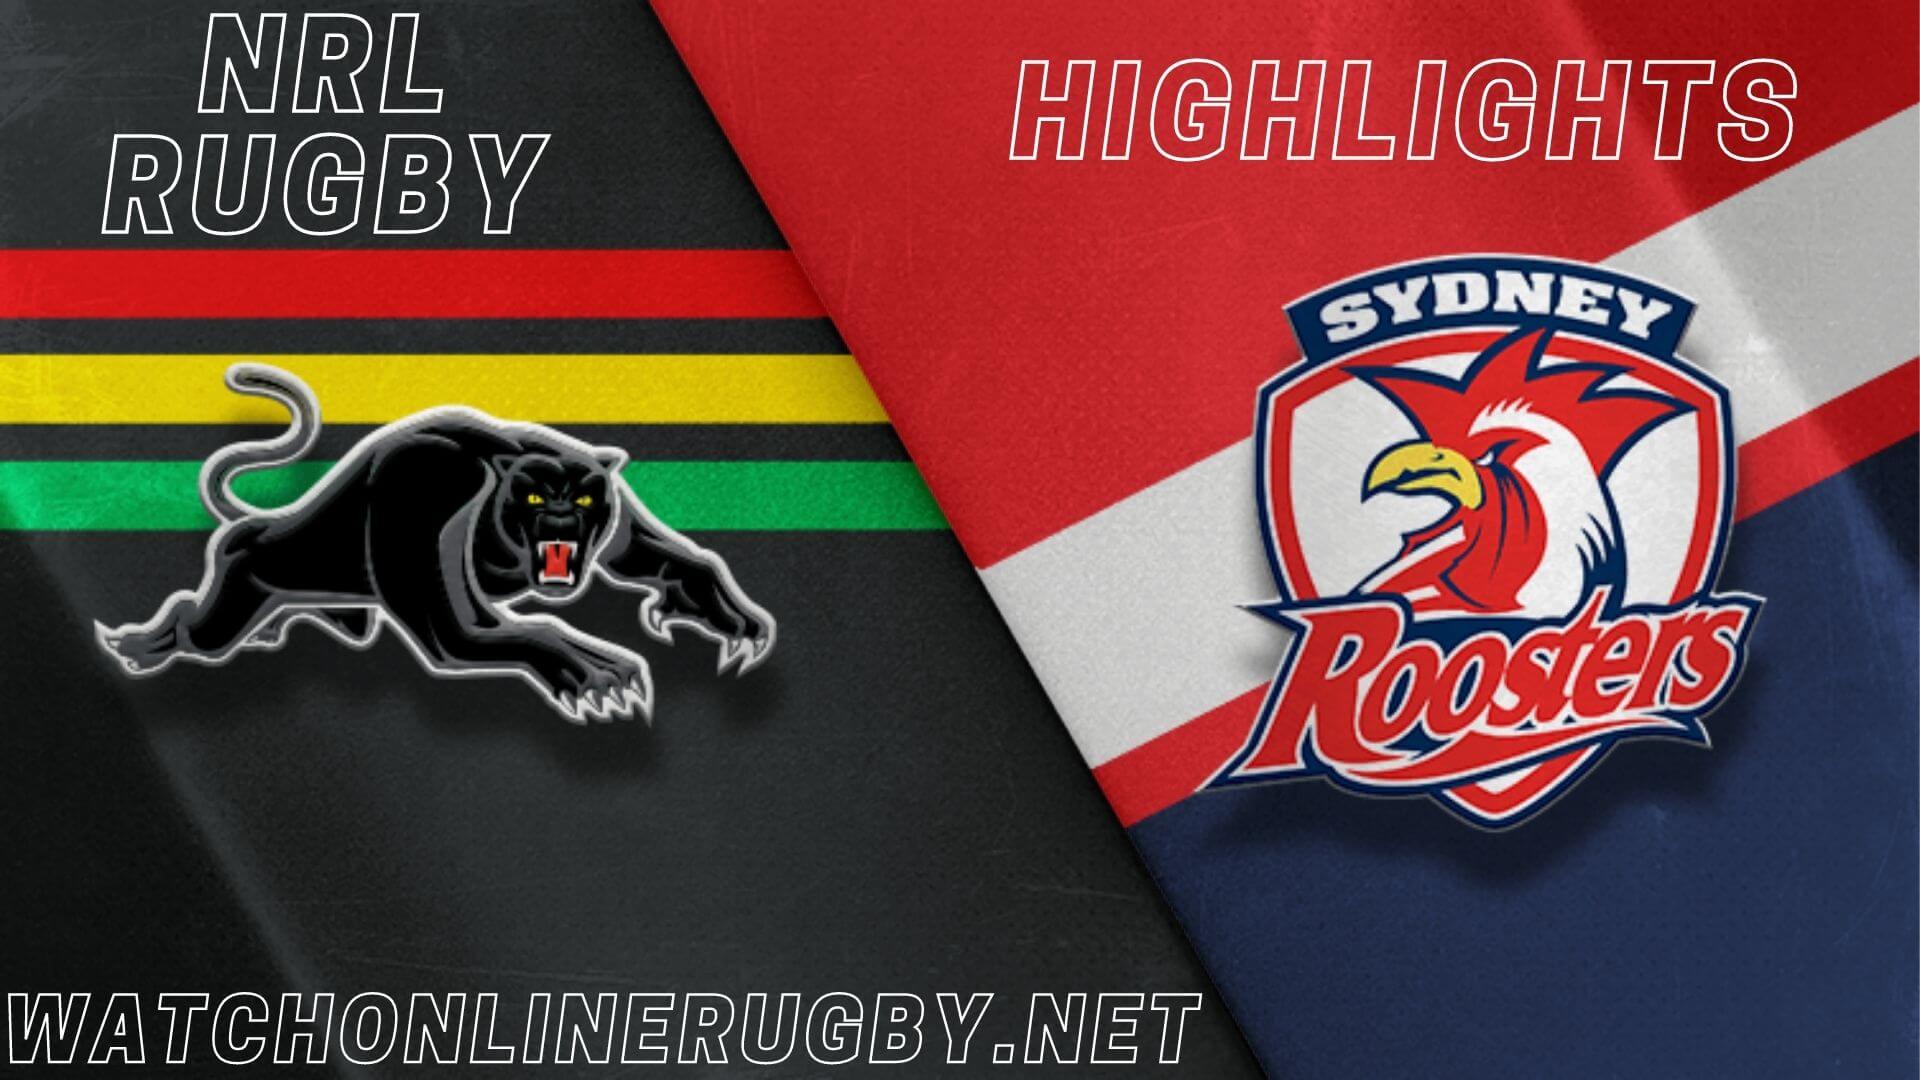 Panthers Vs Roosters Highlights RD 16 NRL Rugby